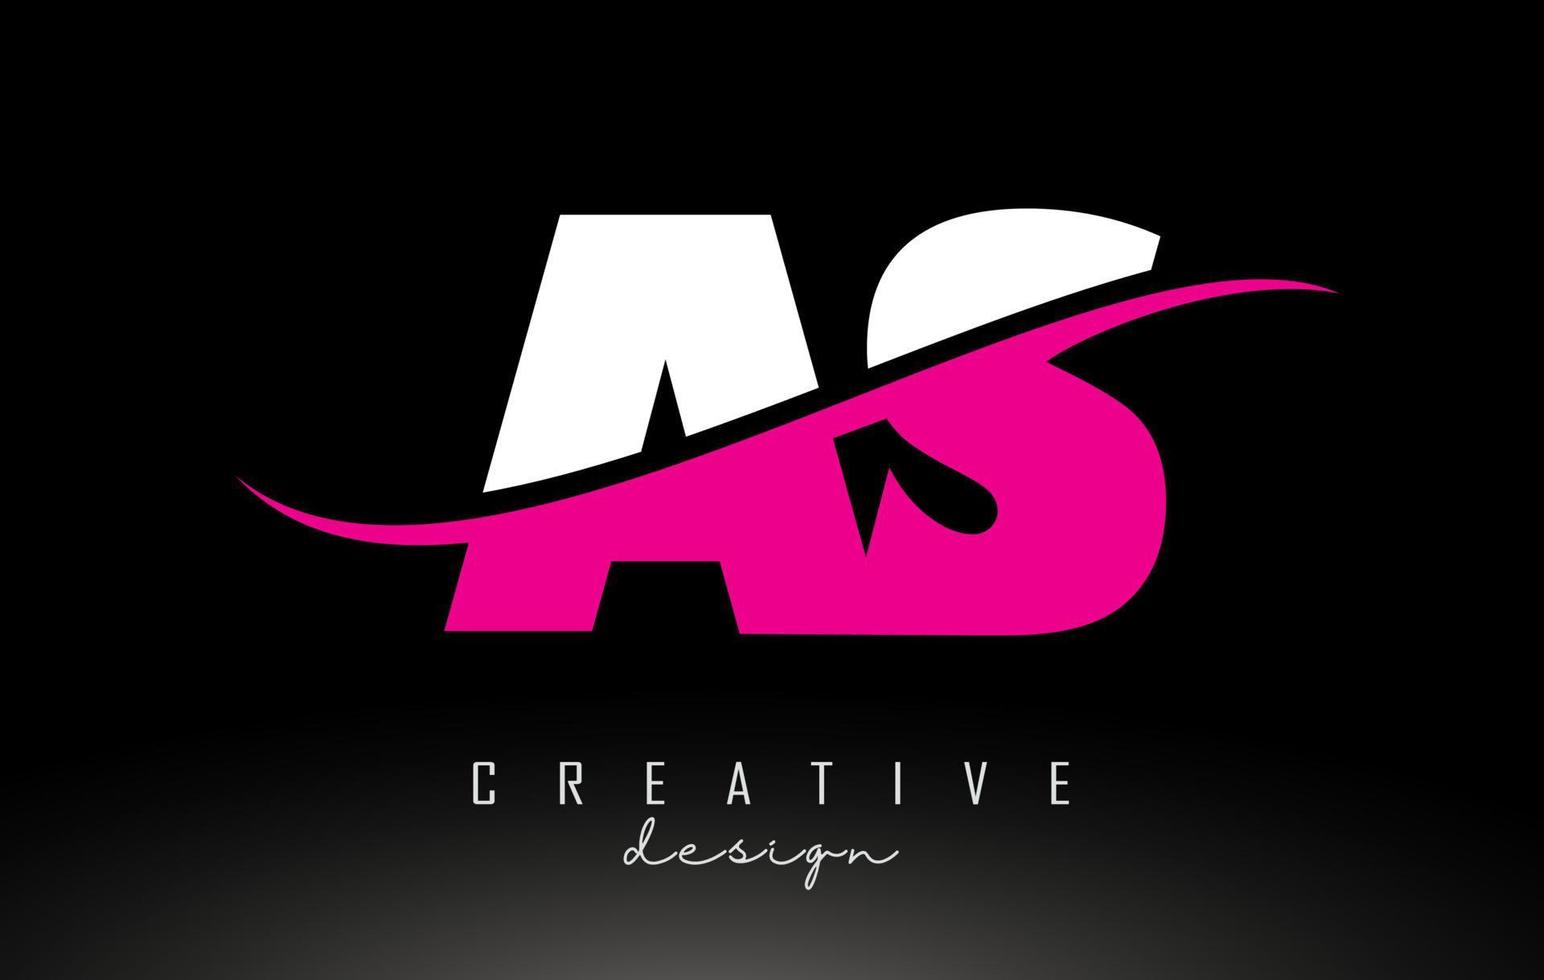 AS A S White and Pink Letter Logo with Swoosh. vector